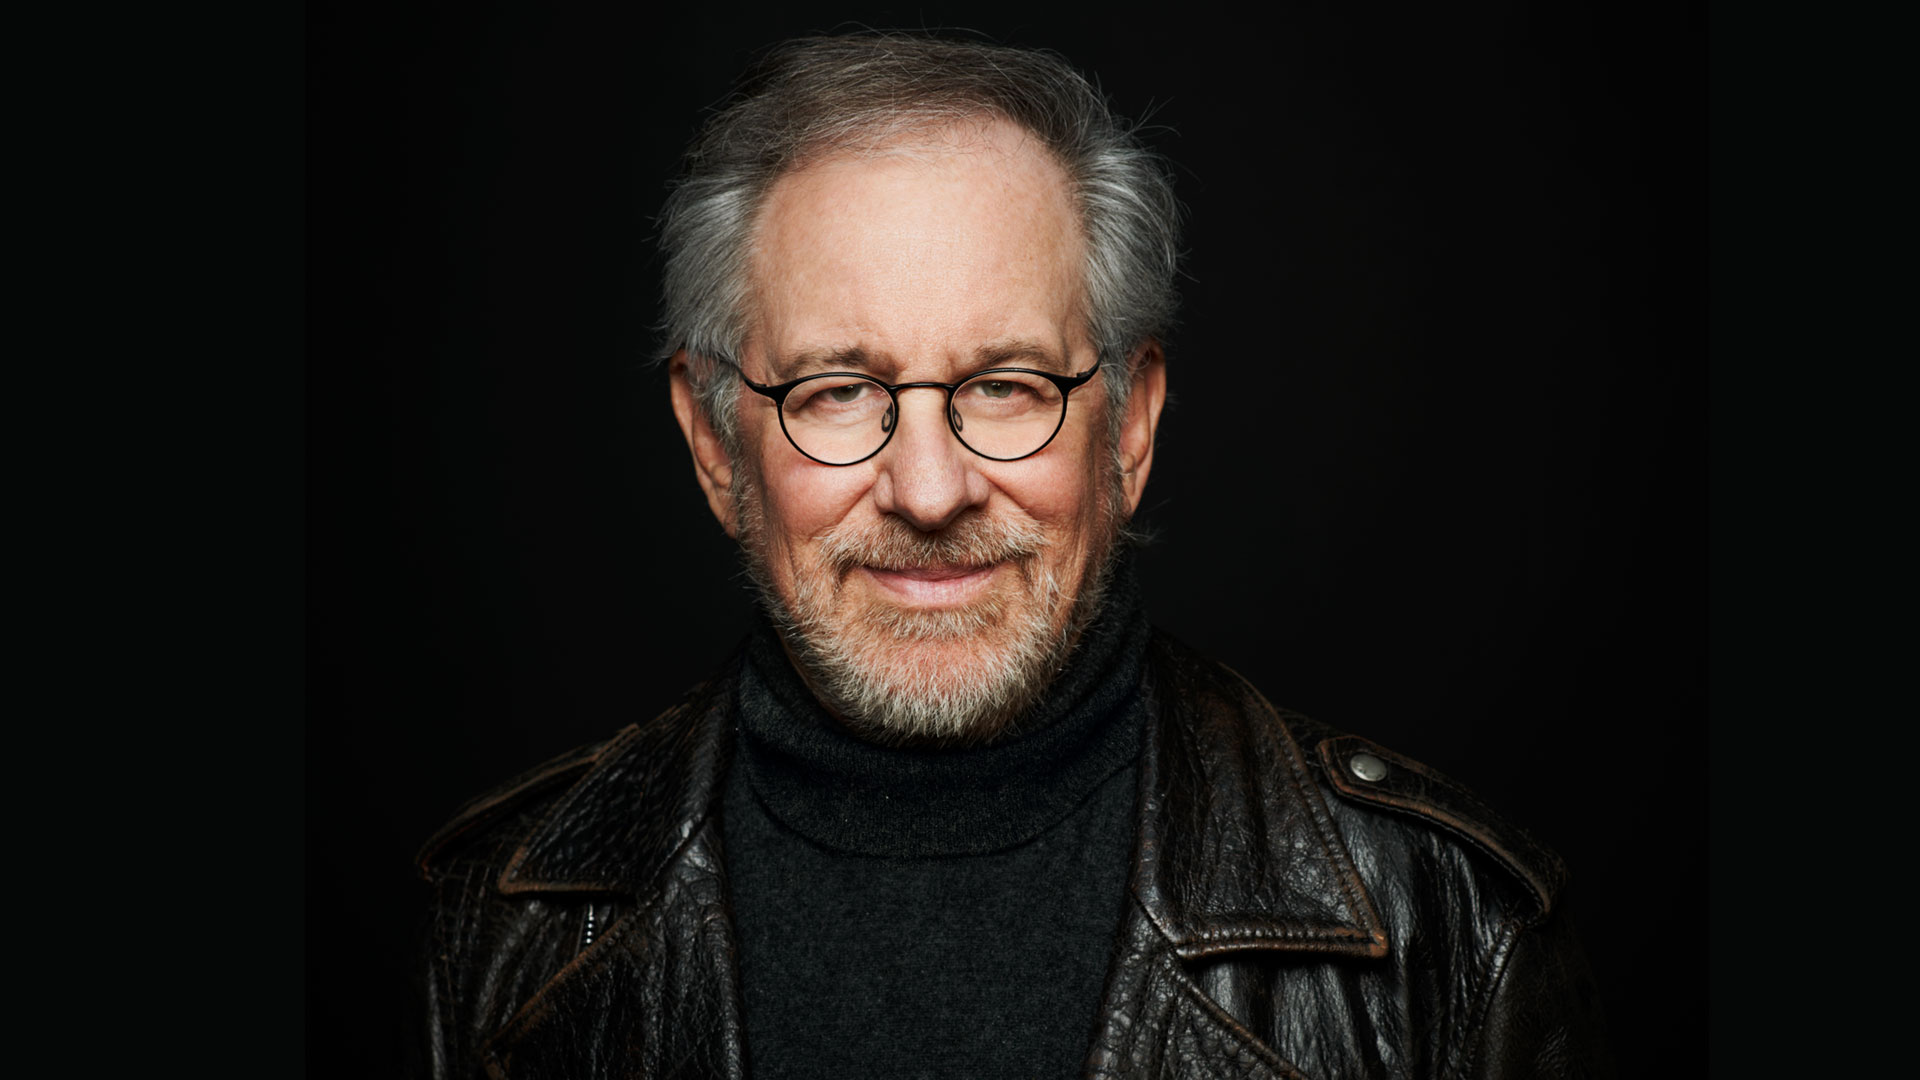 Join Steven Spielberg for 'The Sugarland Express'